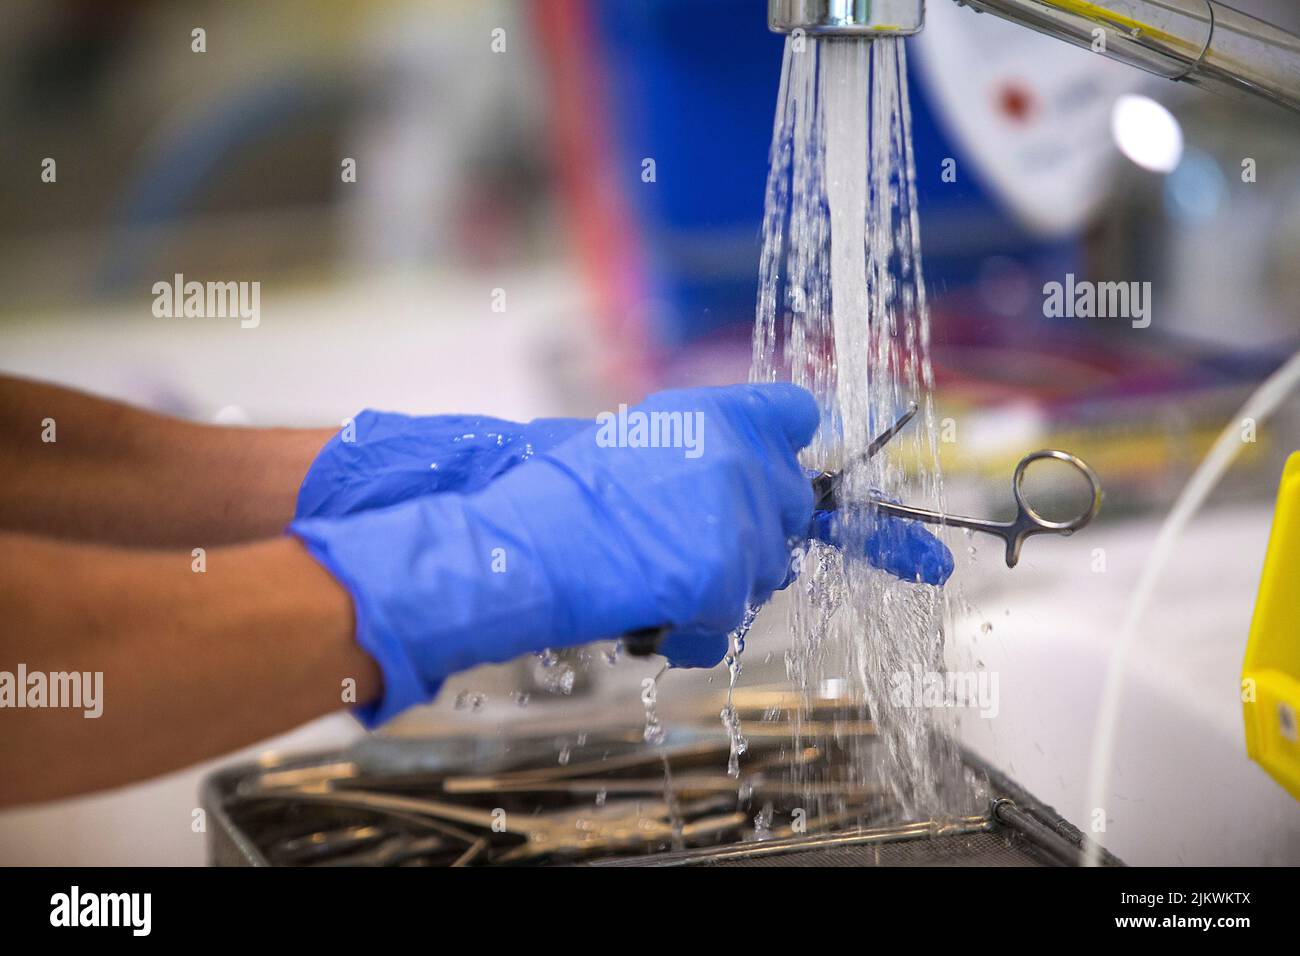 Before sterilization of surgical equipment, surgical instruments are washed by hand. Stock Photo